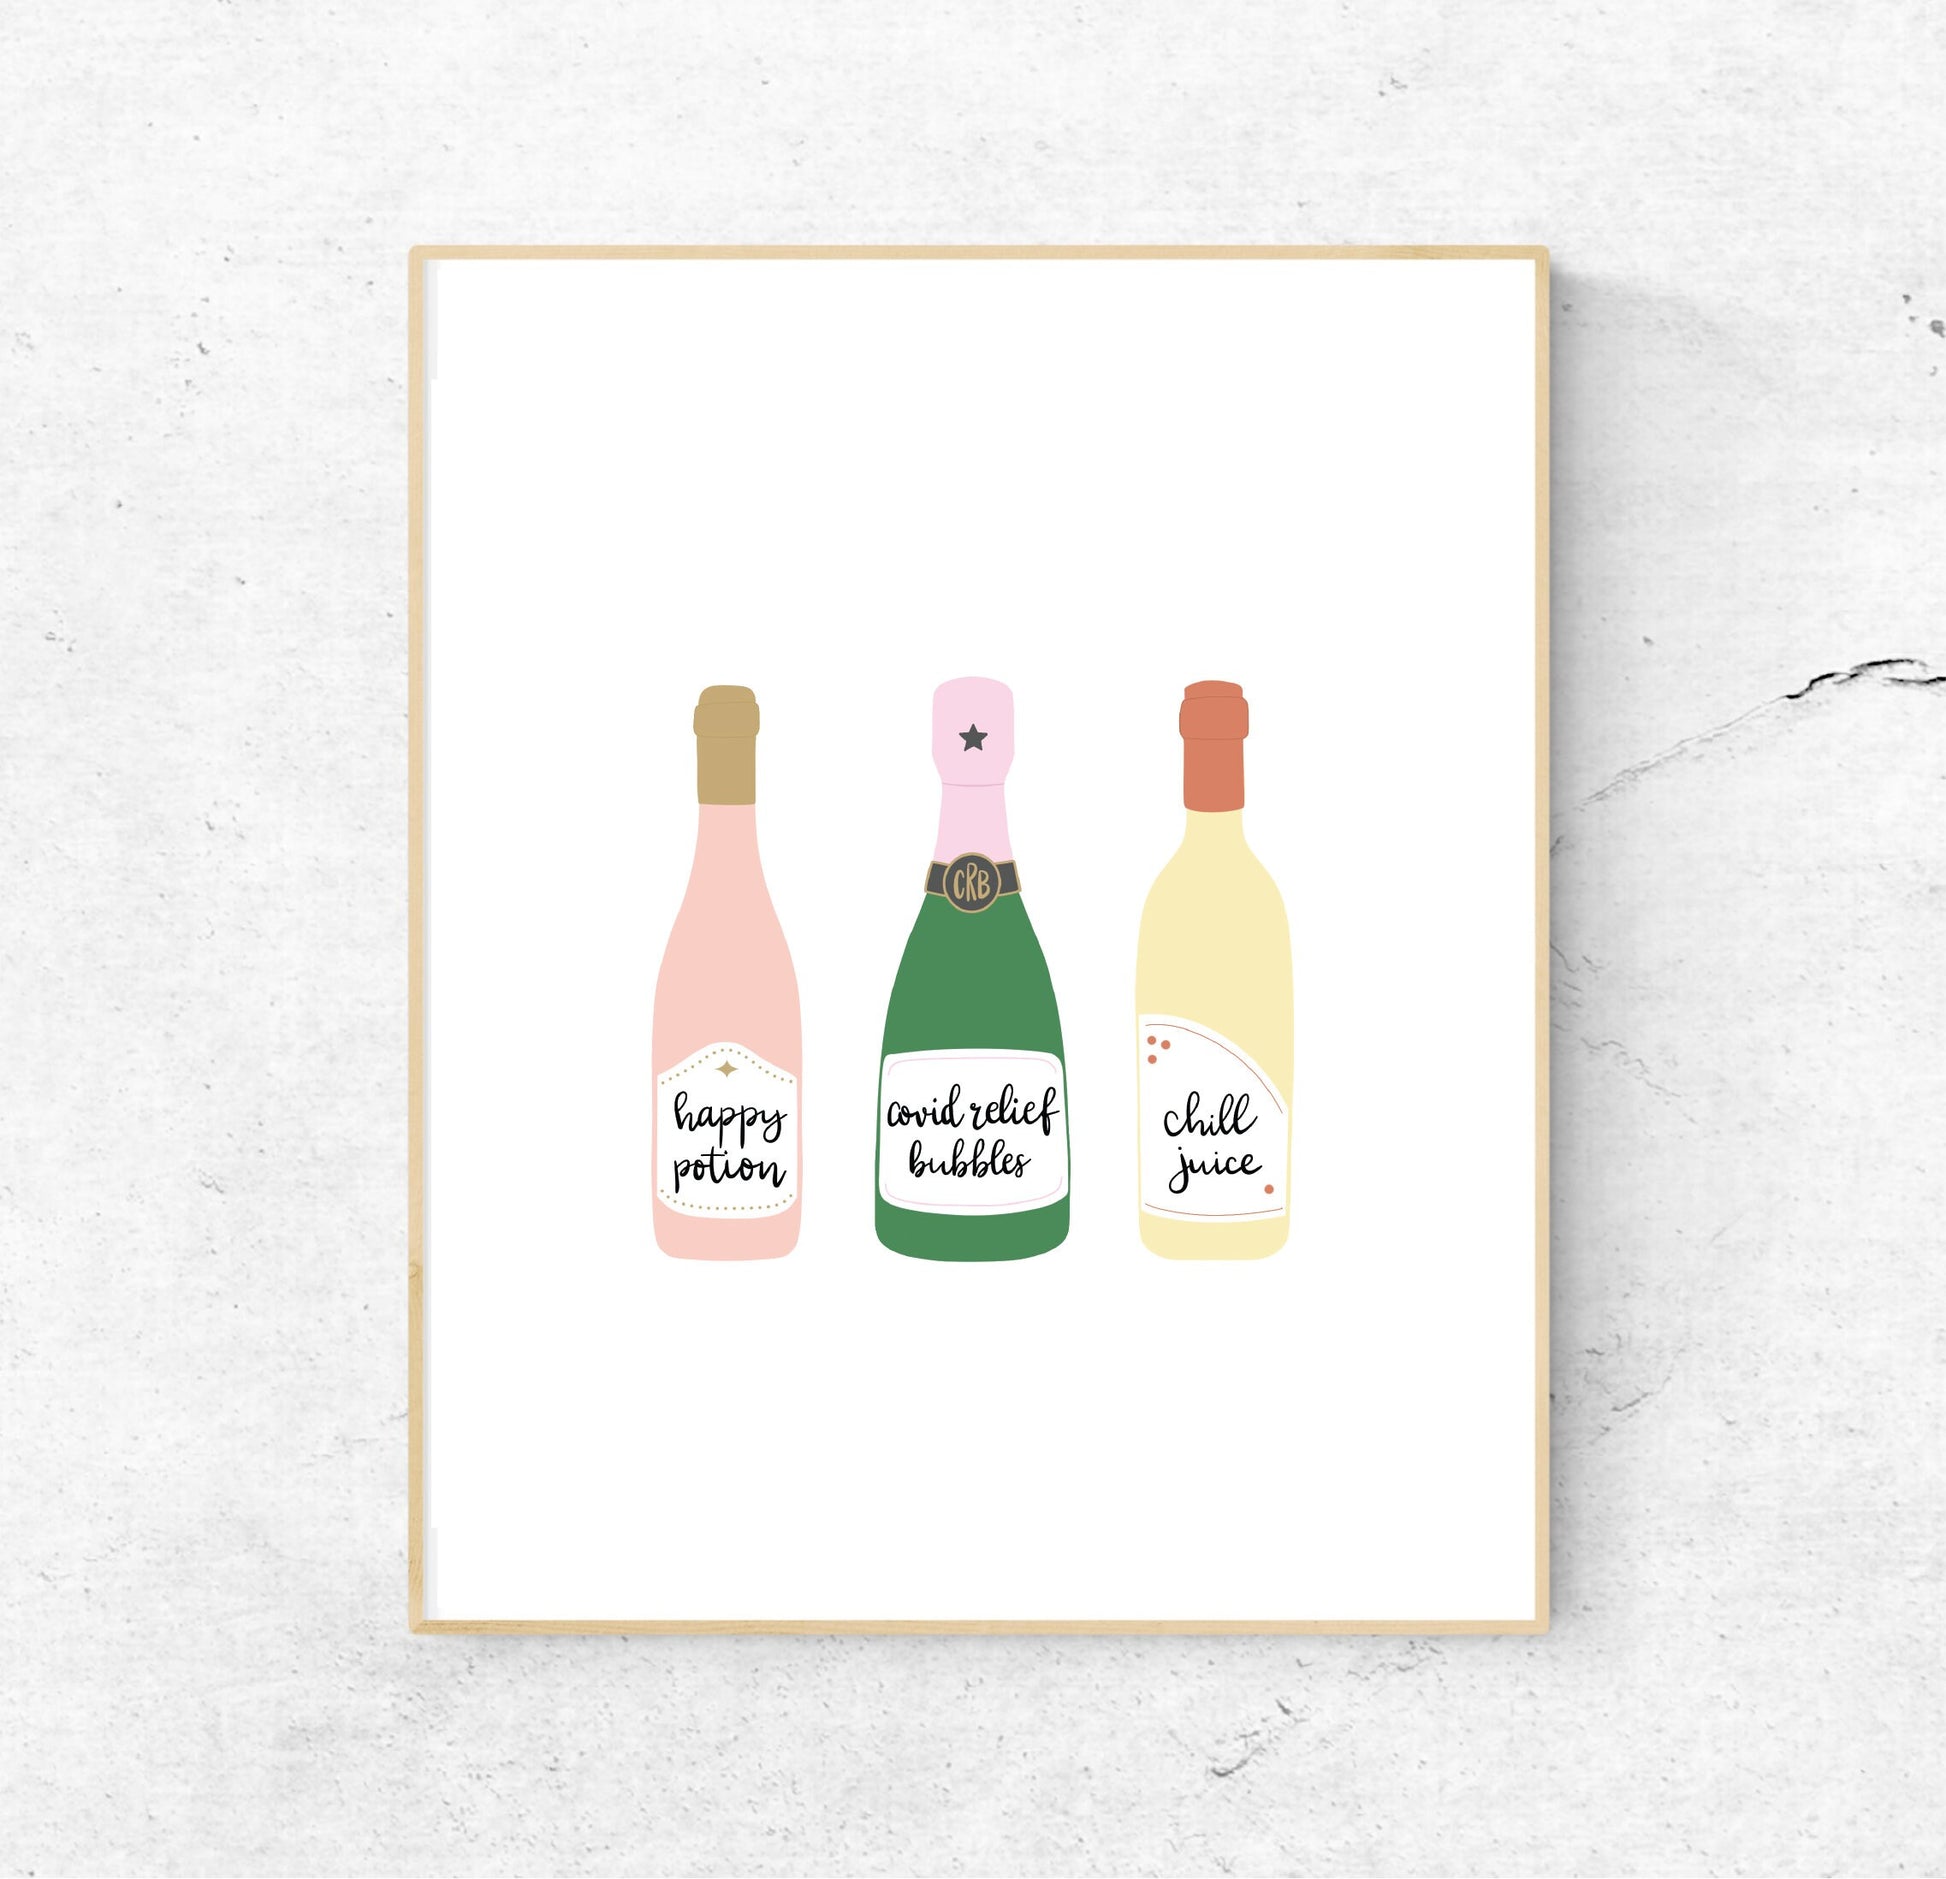 WINE and CHAMPAGNE BOTTLE Illustrations Print | 8x10 - Unframed | Illustration | Covid Relief